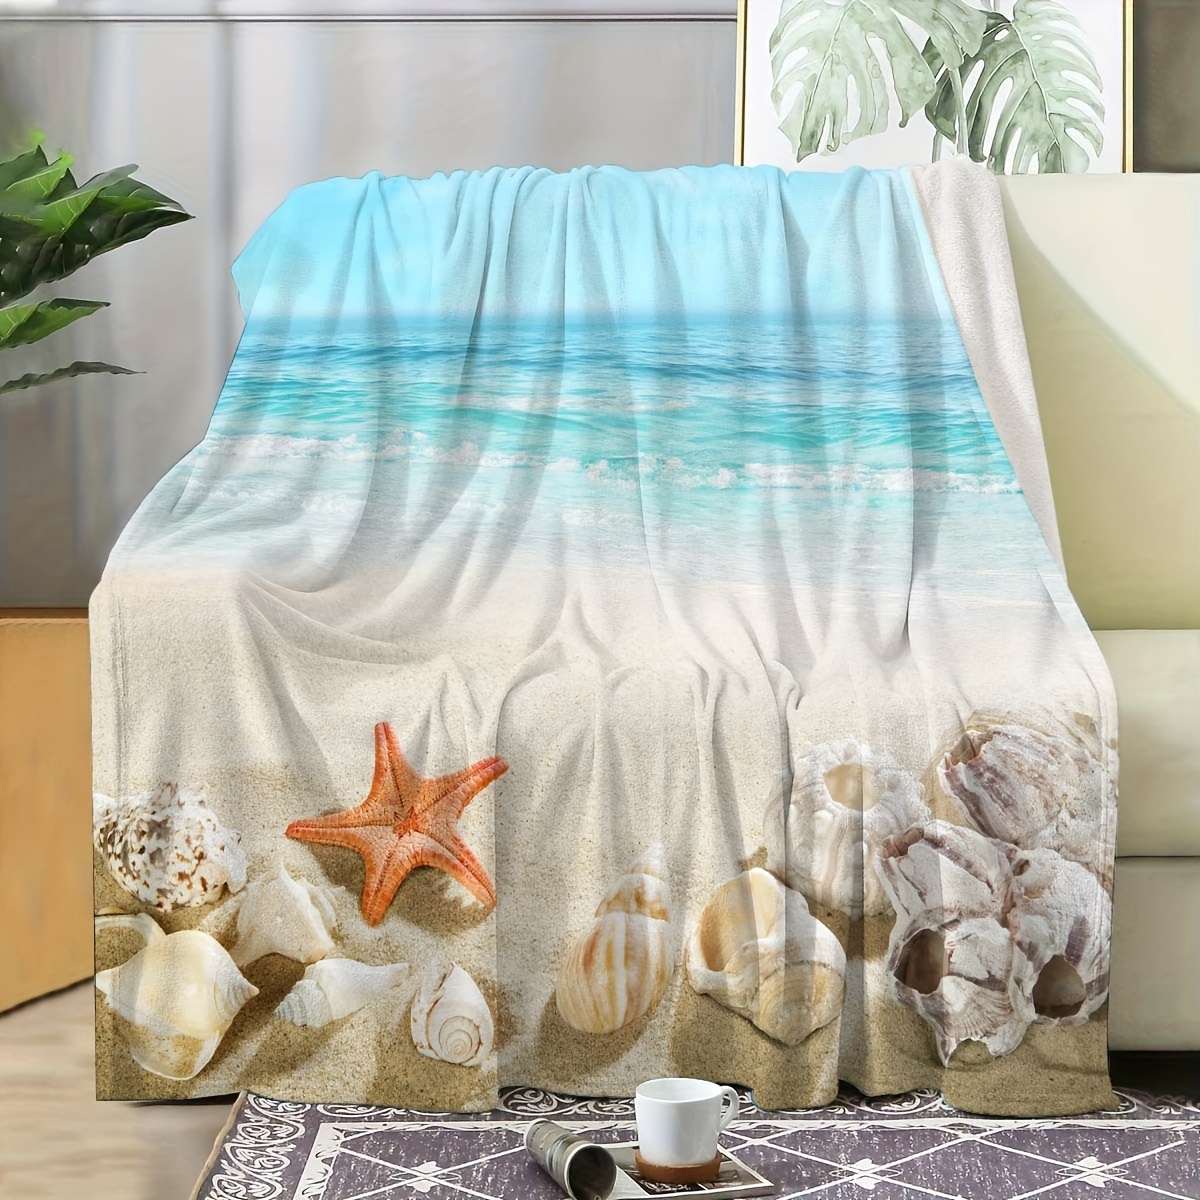 

Cozy Ocean-inspired Flannel Throw Blanket - Soft, Allergy-friendly & Machine Washable For Couch, Bed, Travel, Office - Perfect Gift For Young Group & Adults, All Seasons